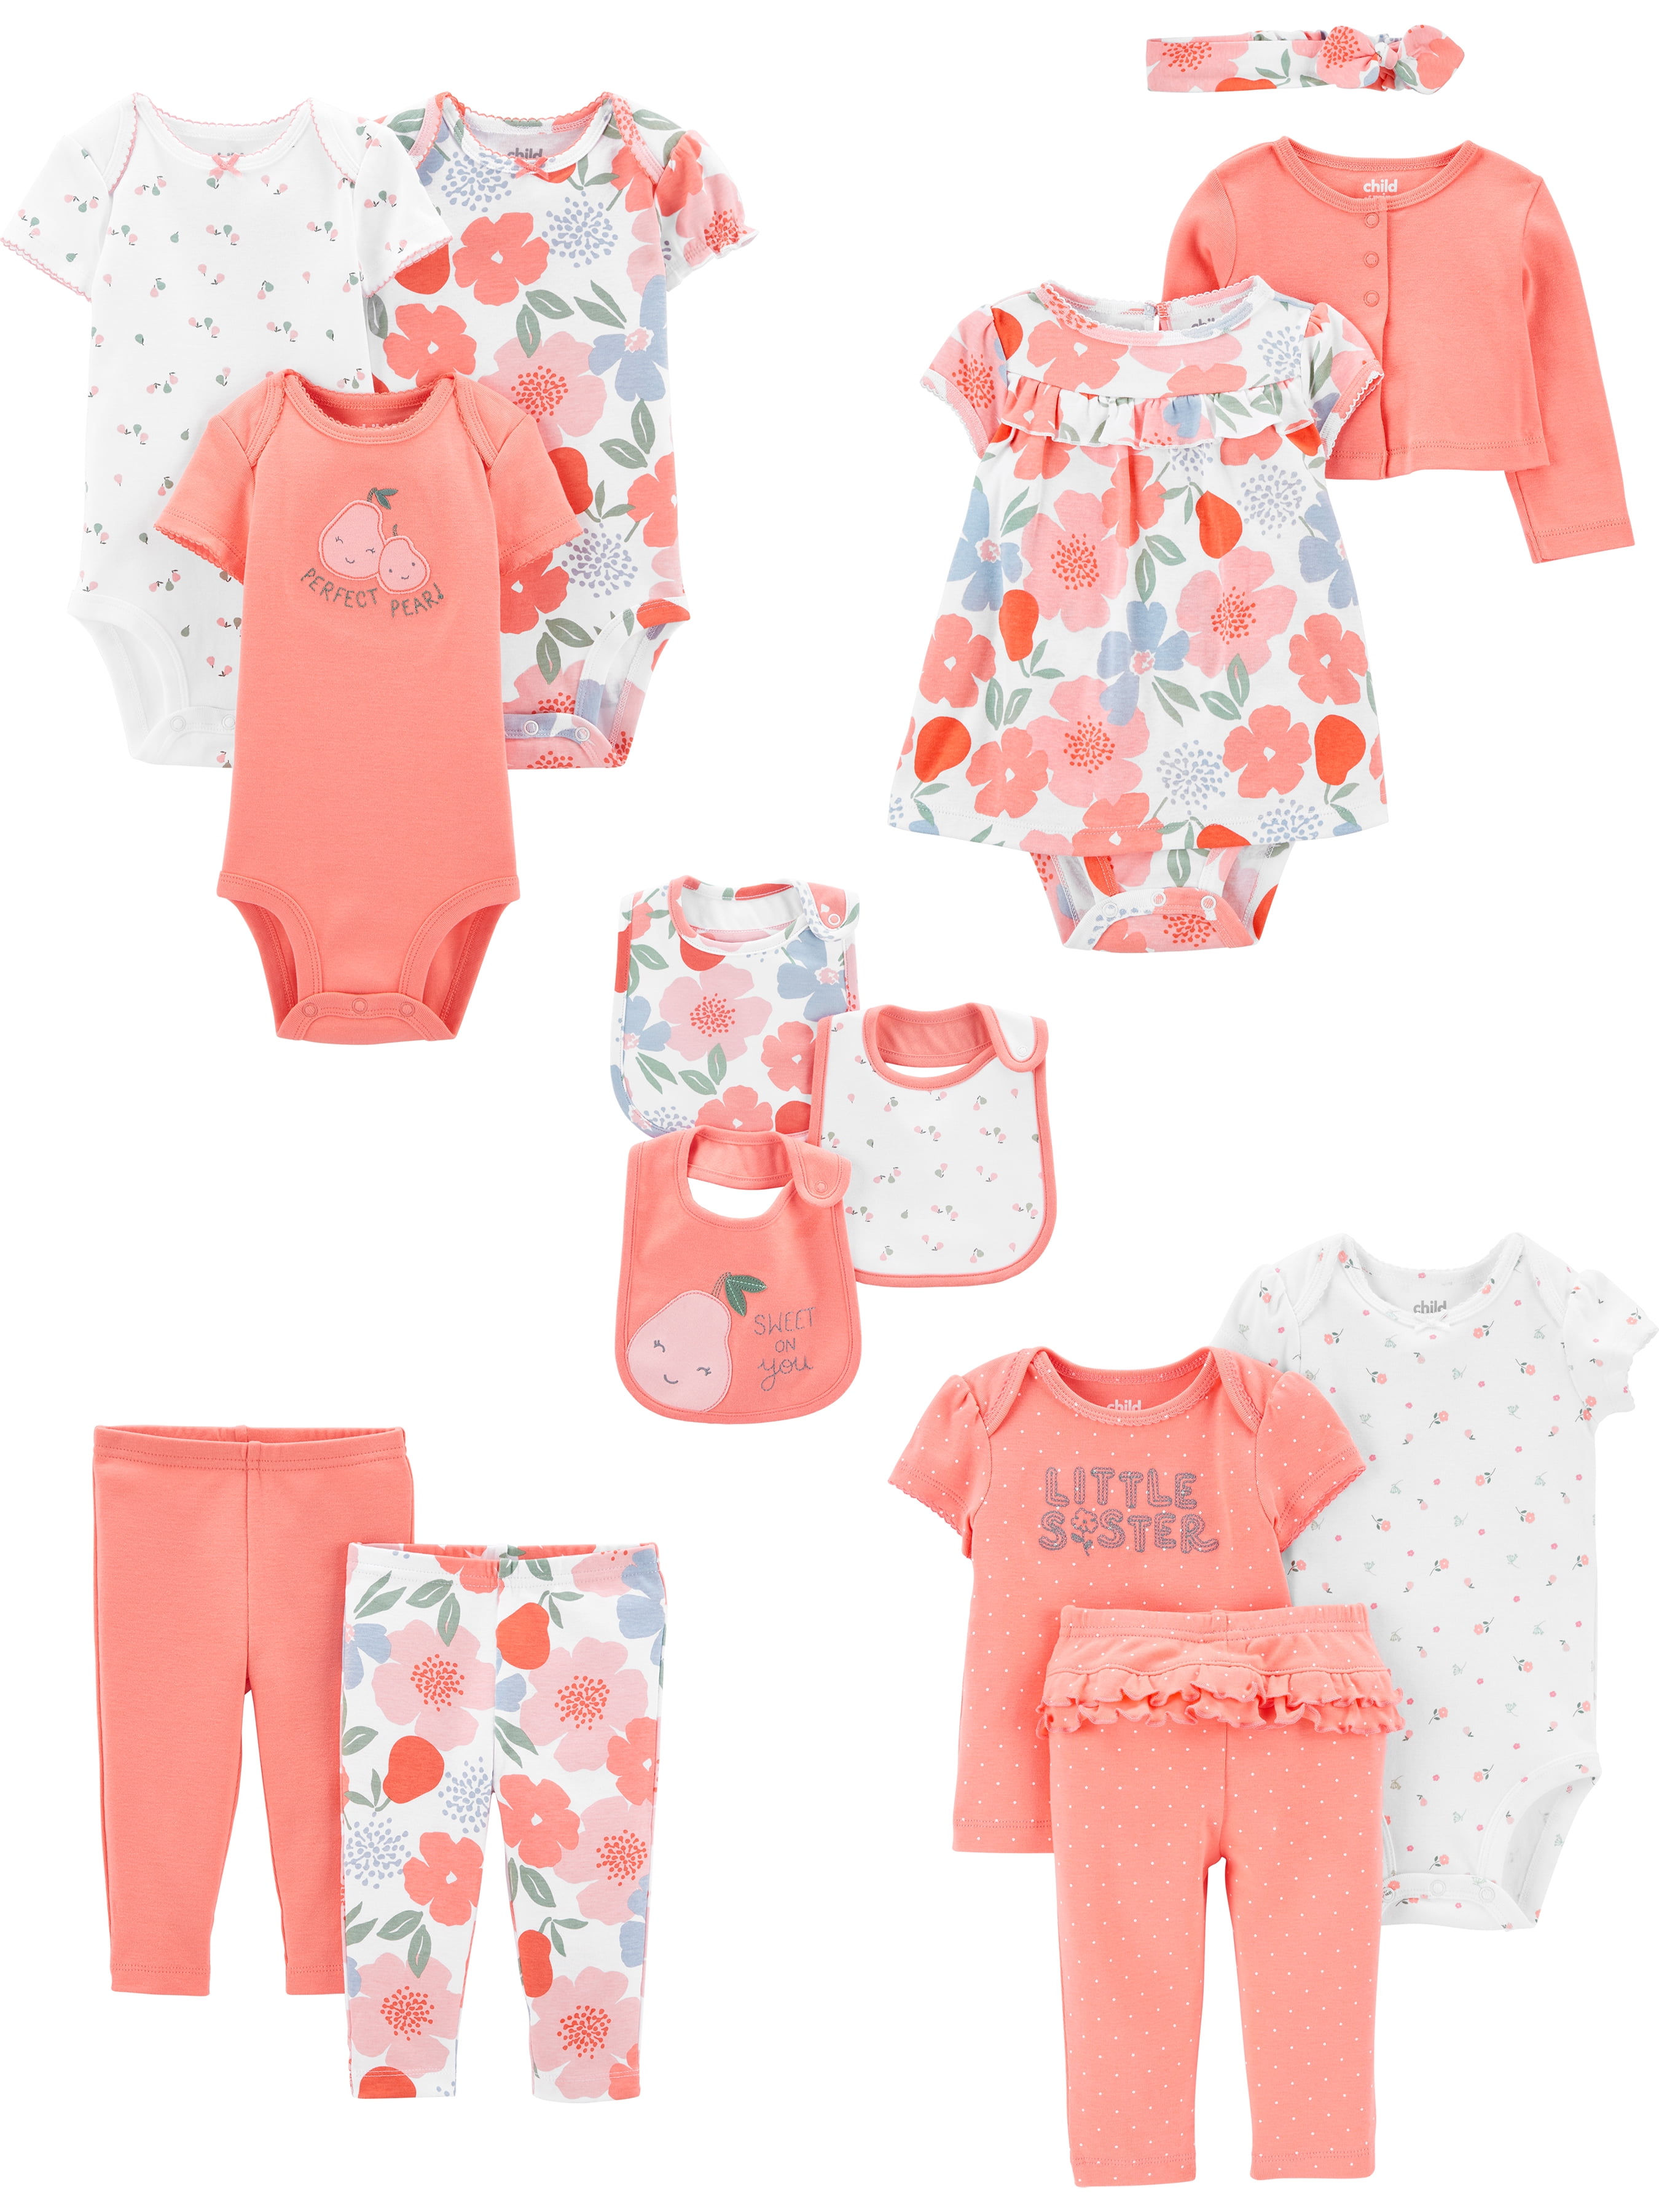 Simple Joys by Carter's Baby Girls' 4-Piece Jacket, Pant, and Bodysuit Set